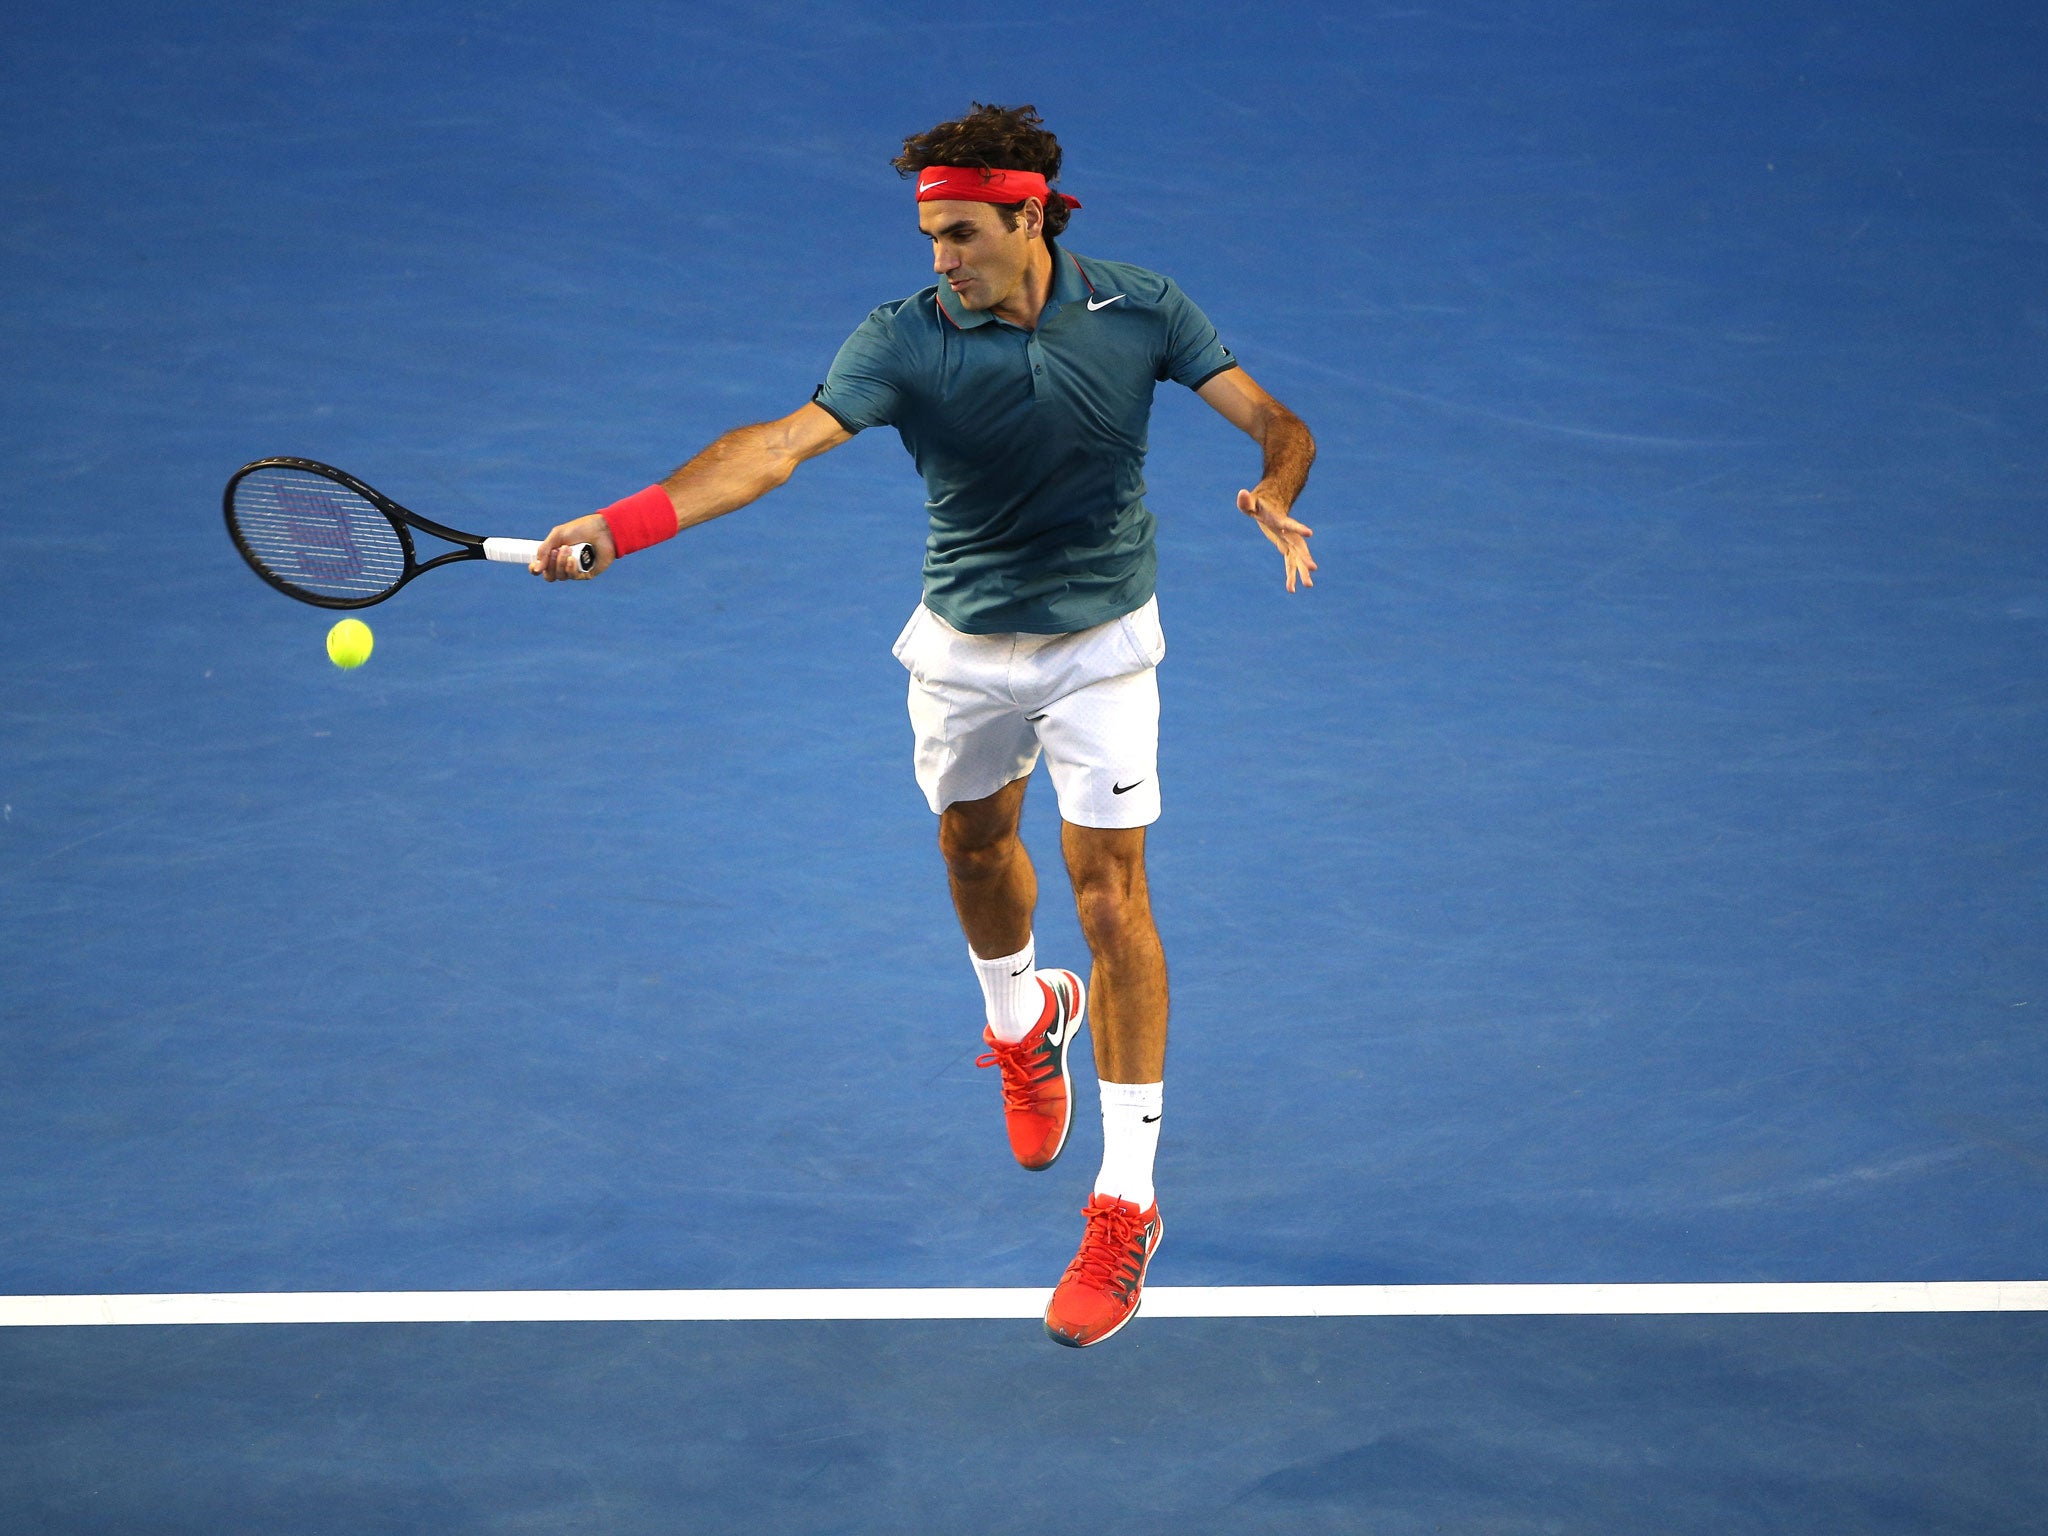 Roger Federer strikes a forehand during his match against Andy Murray